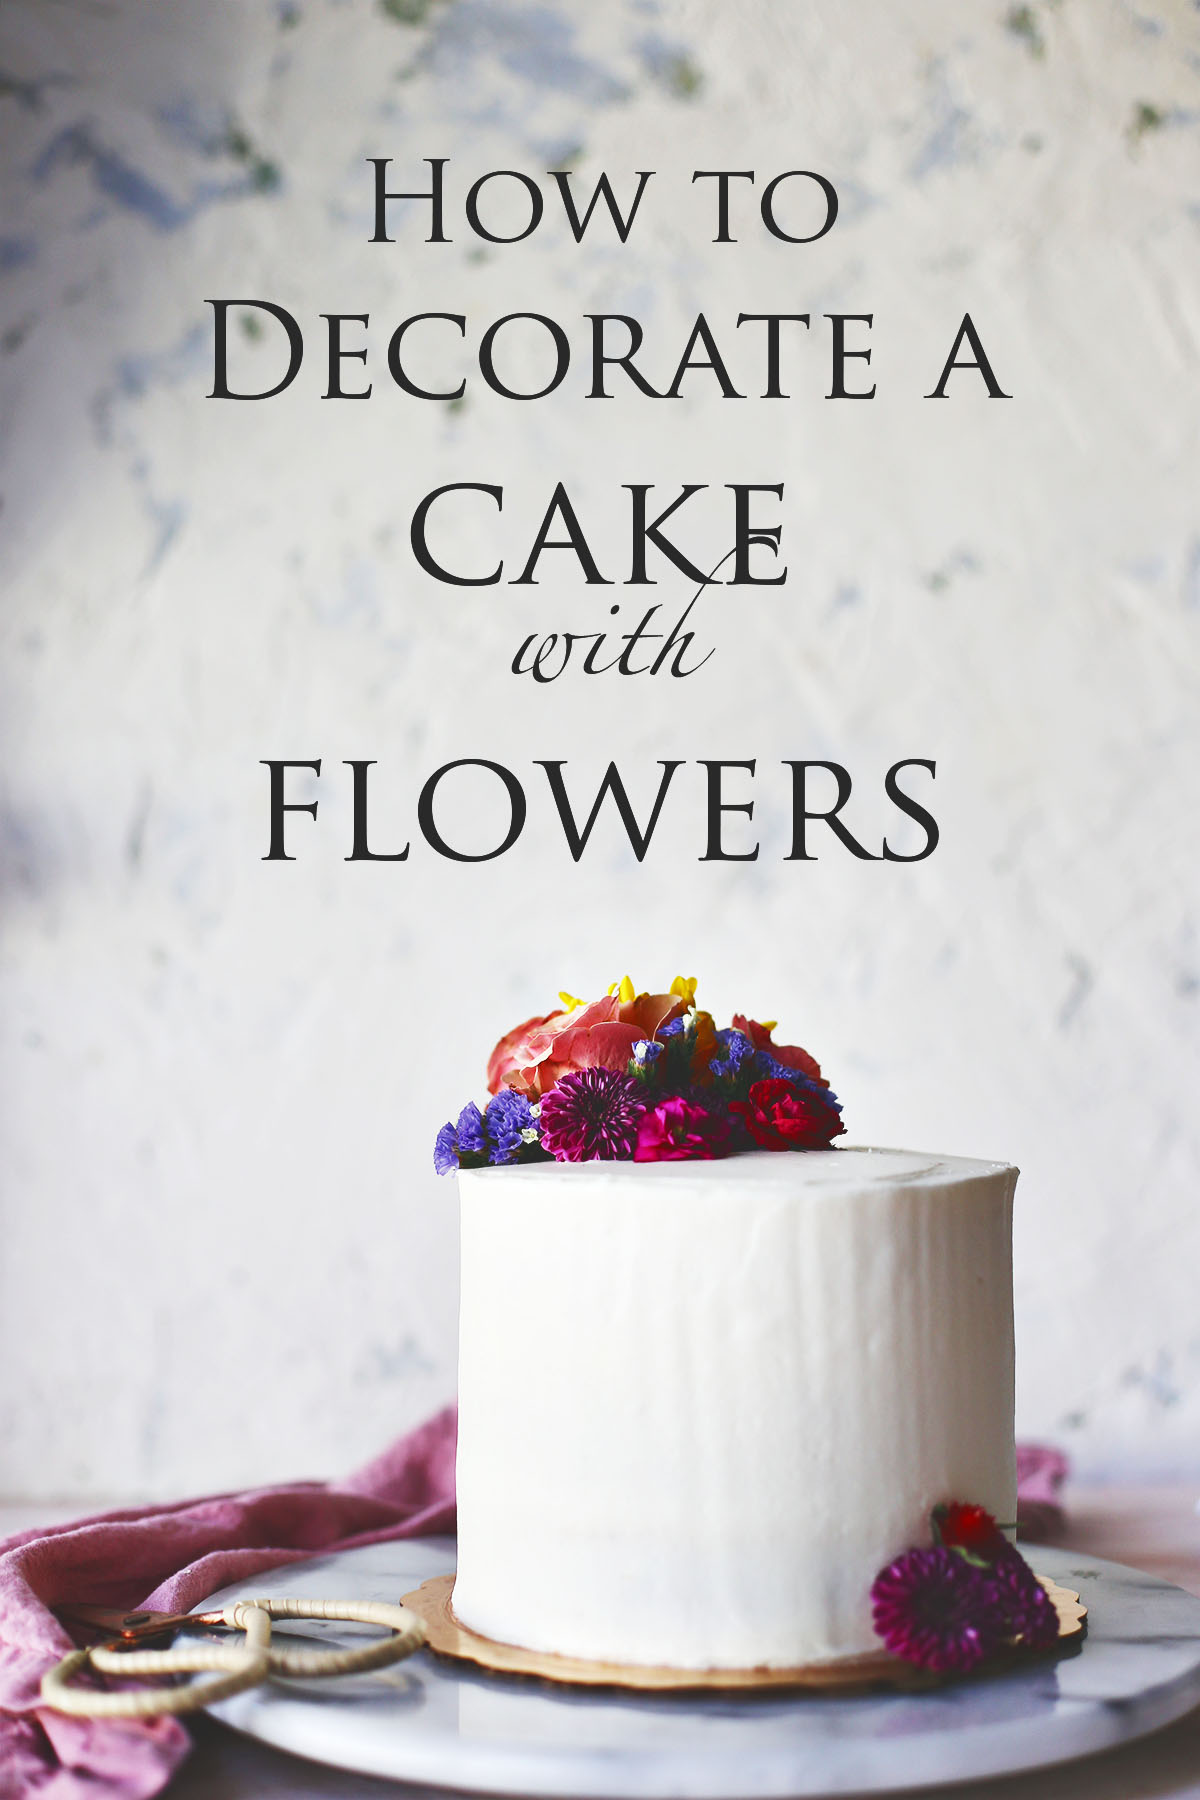 The Cake Decorating Company - We're still not over Edible Flowers